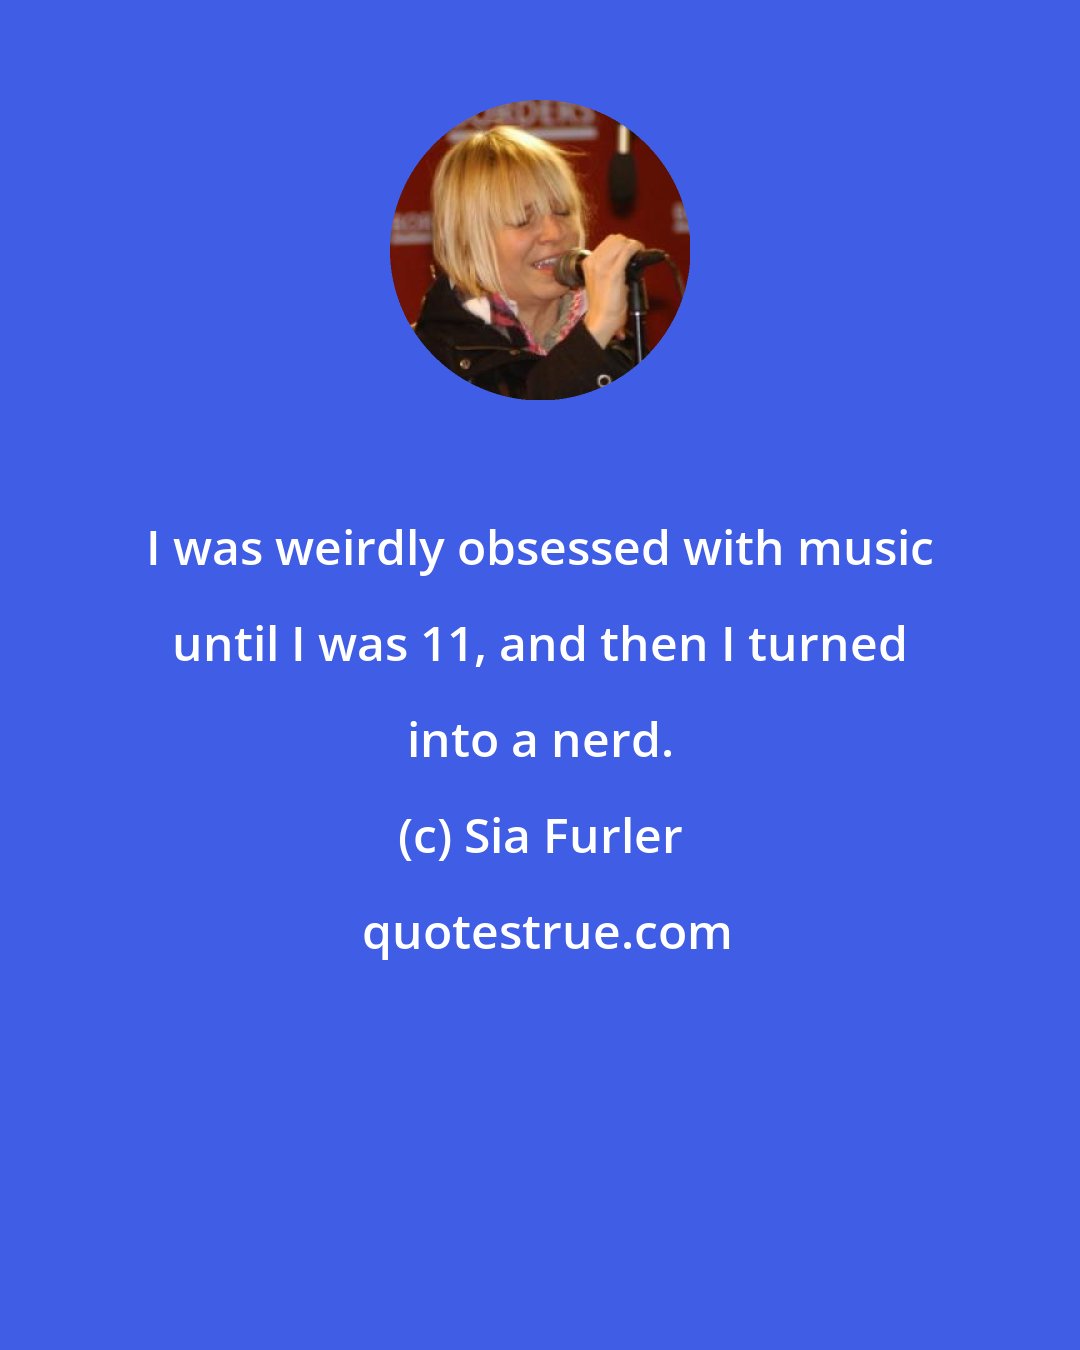 Sia Furler: I was weirdly obsessed with music until I was 11, and then I turned into a nerd.